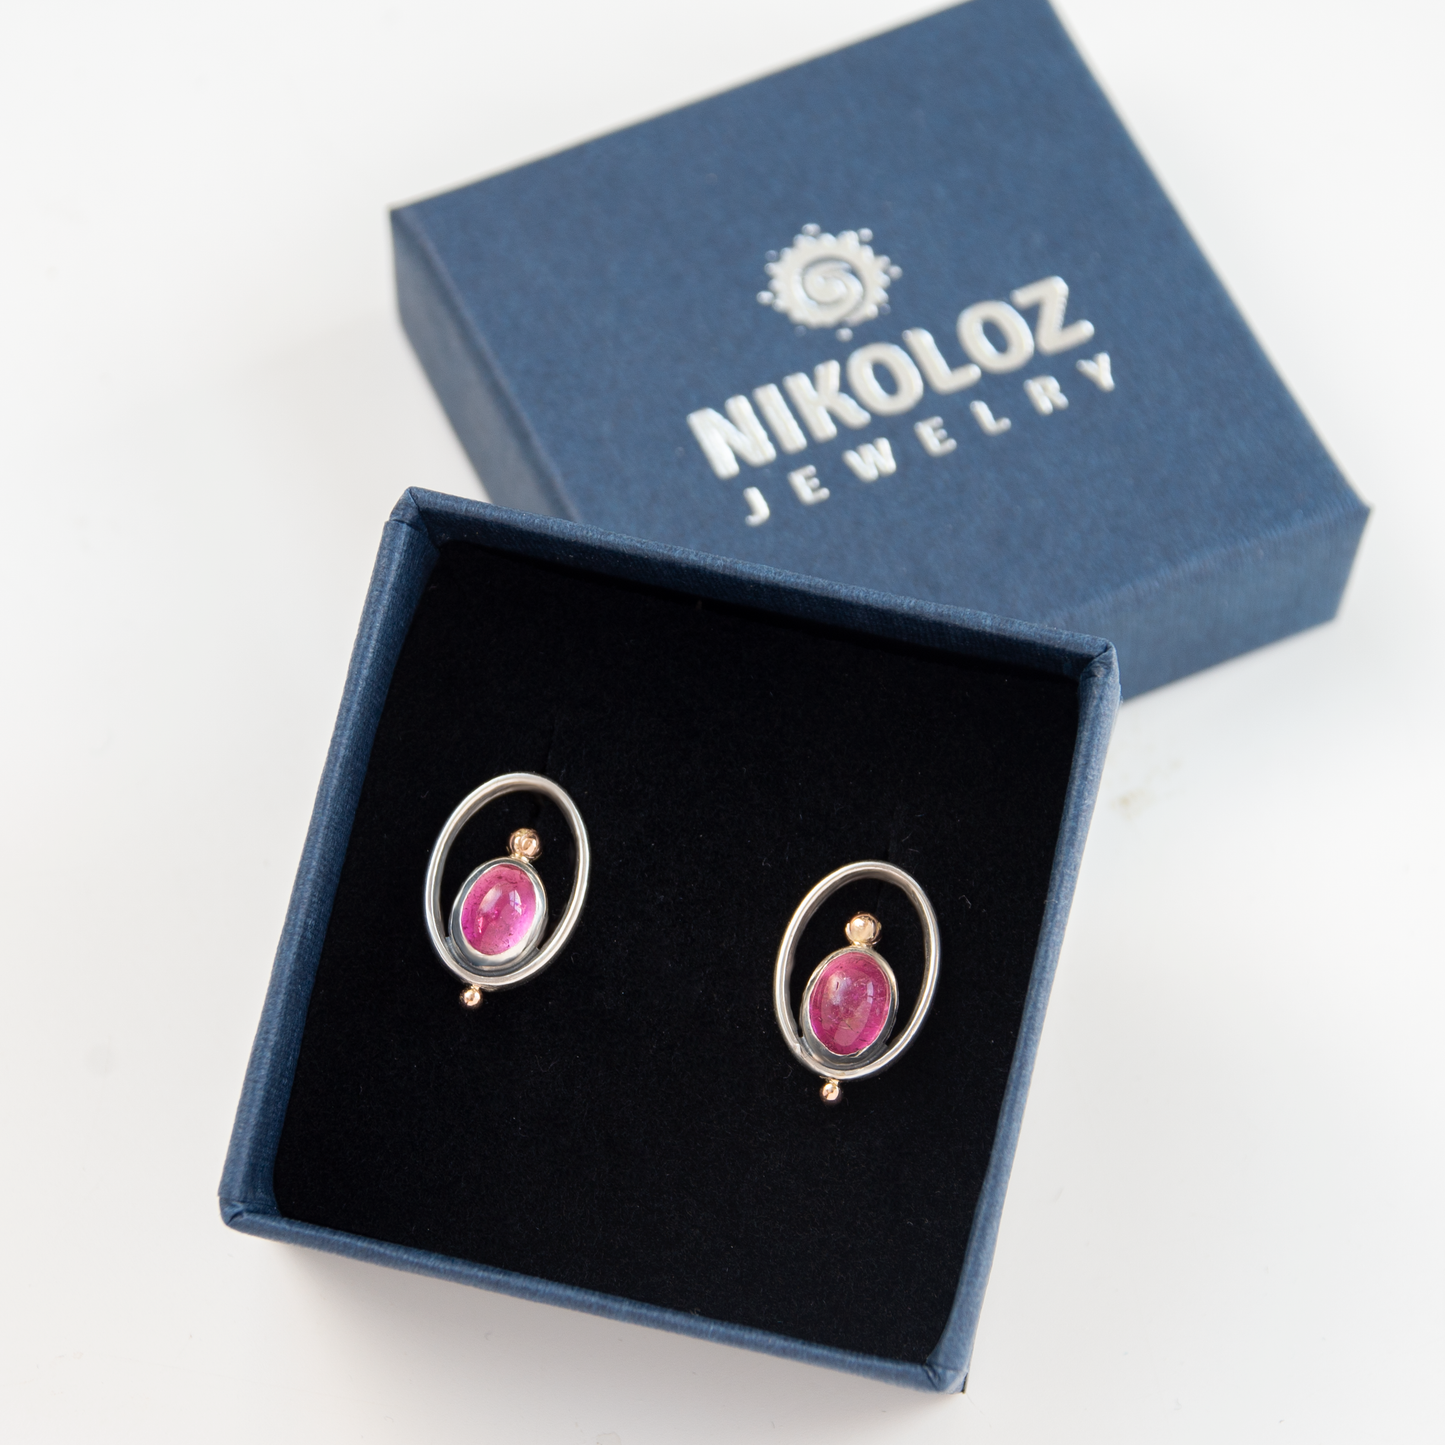 Minimalistic Rose Tourmaline, Sterling Silver, Frame Earrings With Gold Beads